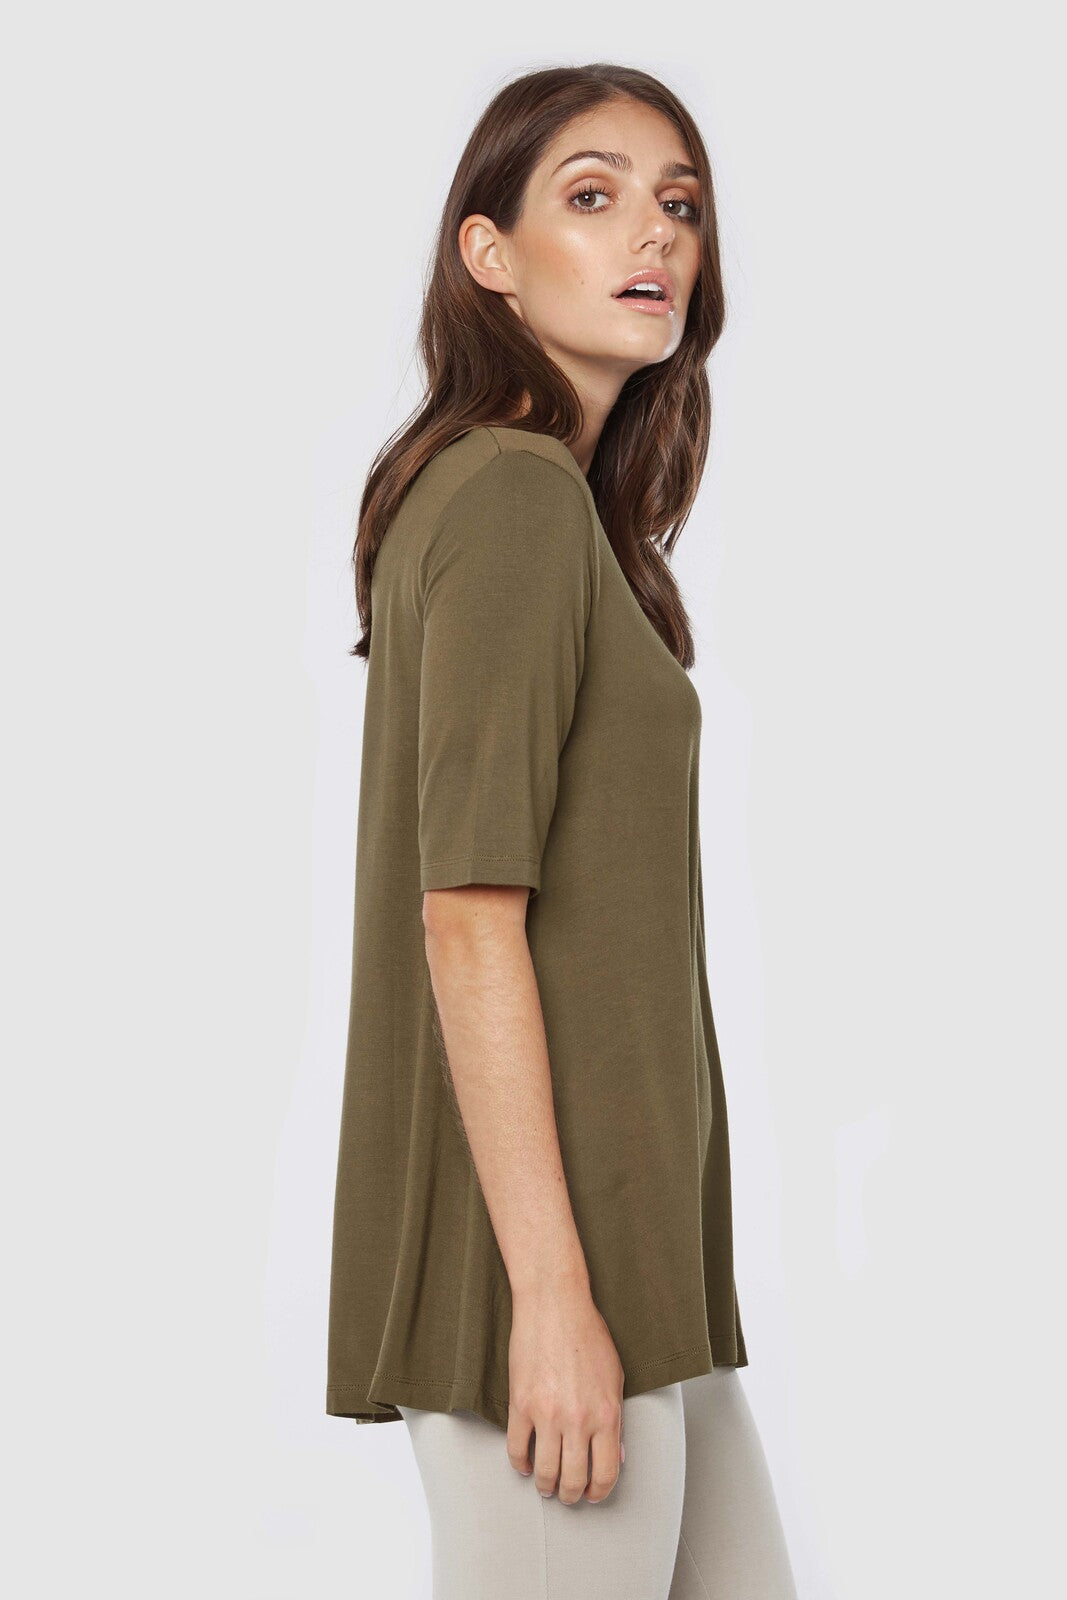 Short Sleeve Tunic Top OLIVE – WICKED WONDERS